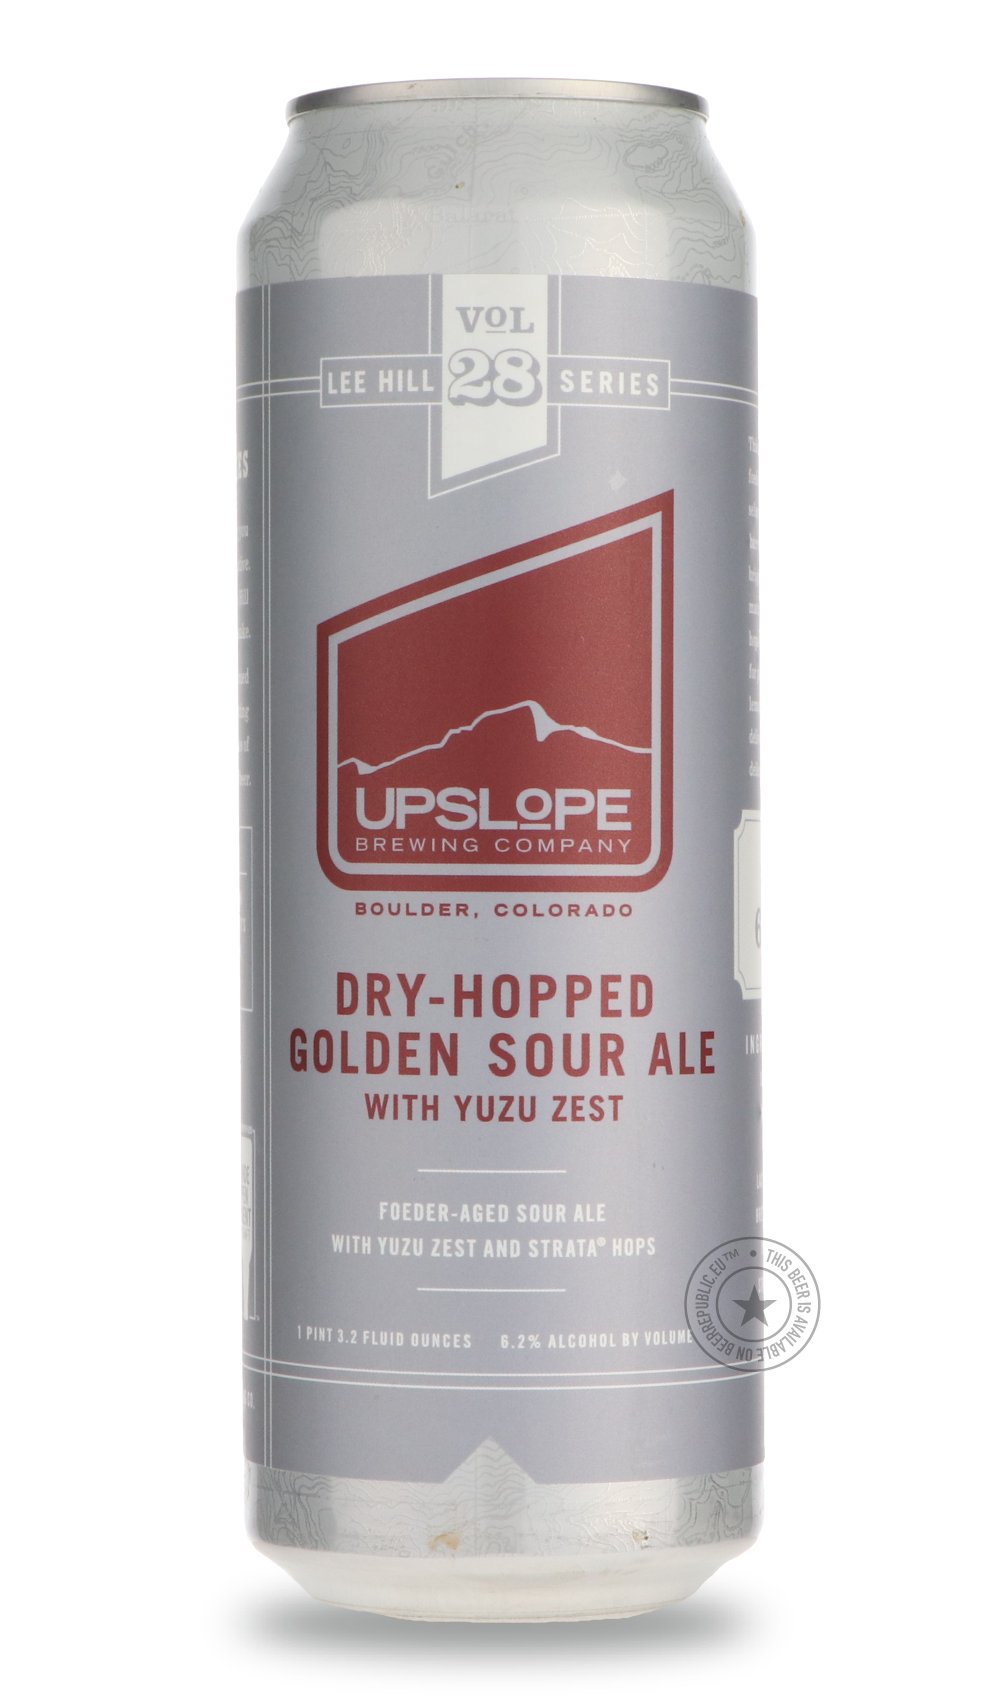 -Upslope- Lee Hill Vol. 28 Dry-Hopped Golden Sour Ale-Sour / Wild & Fruity- Only @ Beer Republic - The best online beer store for American & Canadian craft beer - Buy beer online from the USA and Canada - Bier online kopen - Amerikaans bier kopen - Craft beer store - Craft beer kopen - Amerikanisch bier kaufen - Bier online kaufen - Acheter biere online - IPA - Stout - Porter - New England IPA - Hazy IPA - Imperial Stout - Barrel Aged - Barrel Aged Imperial Stout - Brown - Dark beer - Blond - Blonde - Pilsn